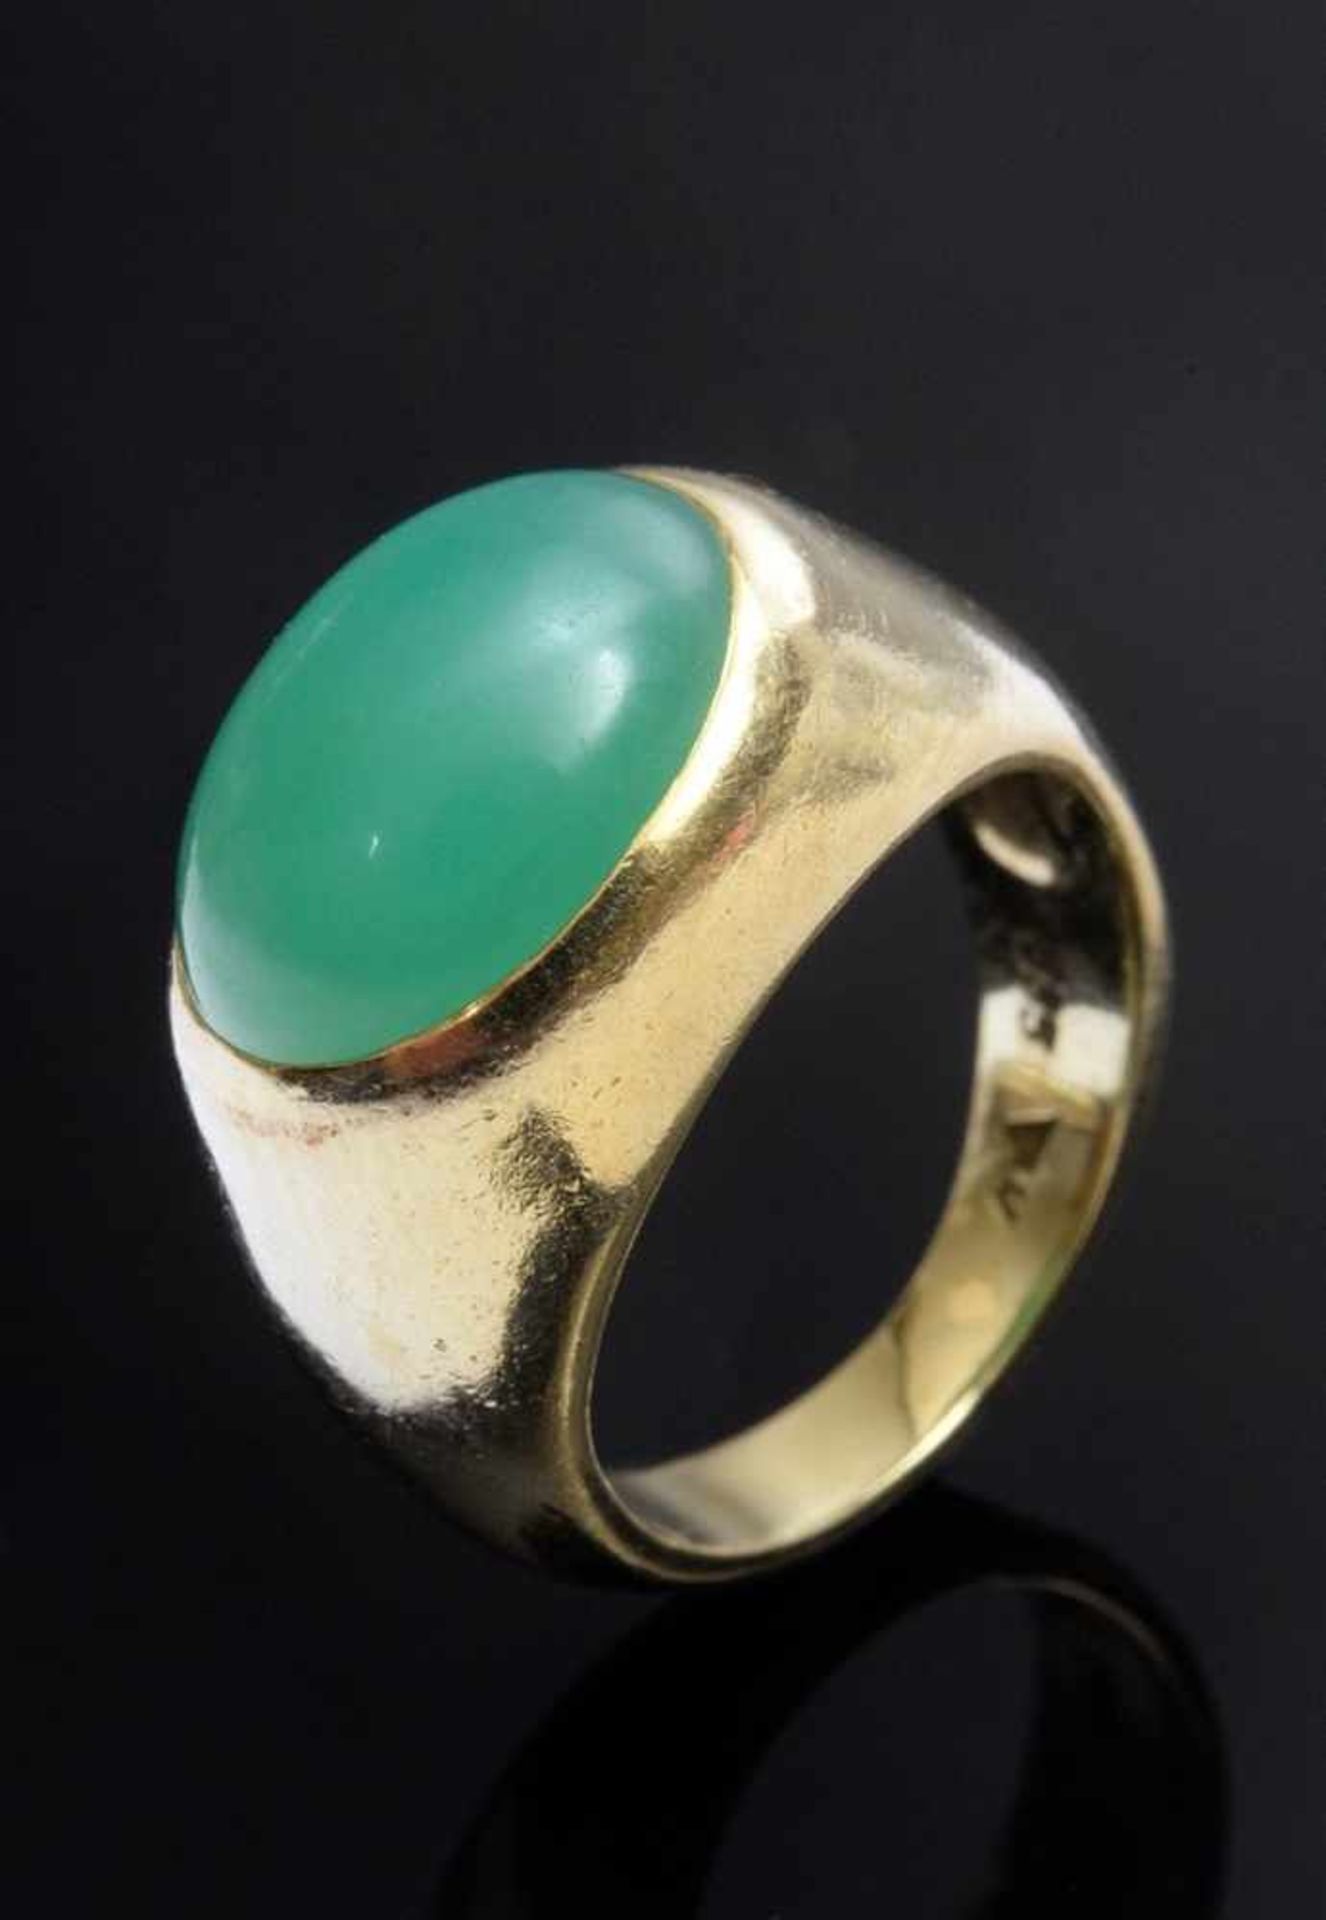 GG 585 Band ring with chrysoprase cabochon, 6,2g, size 44,5, evidence of use